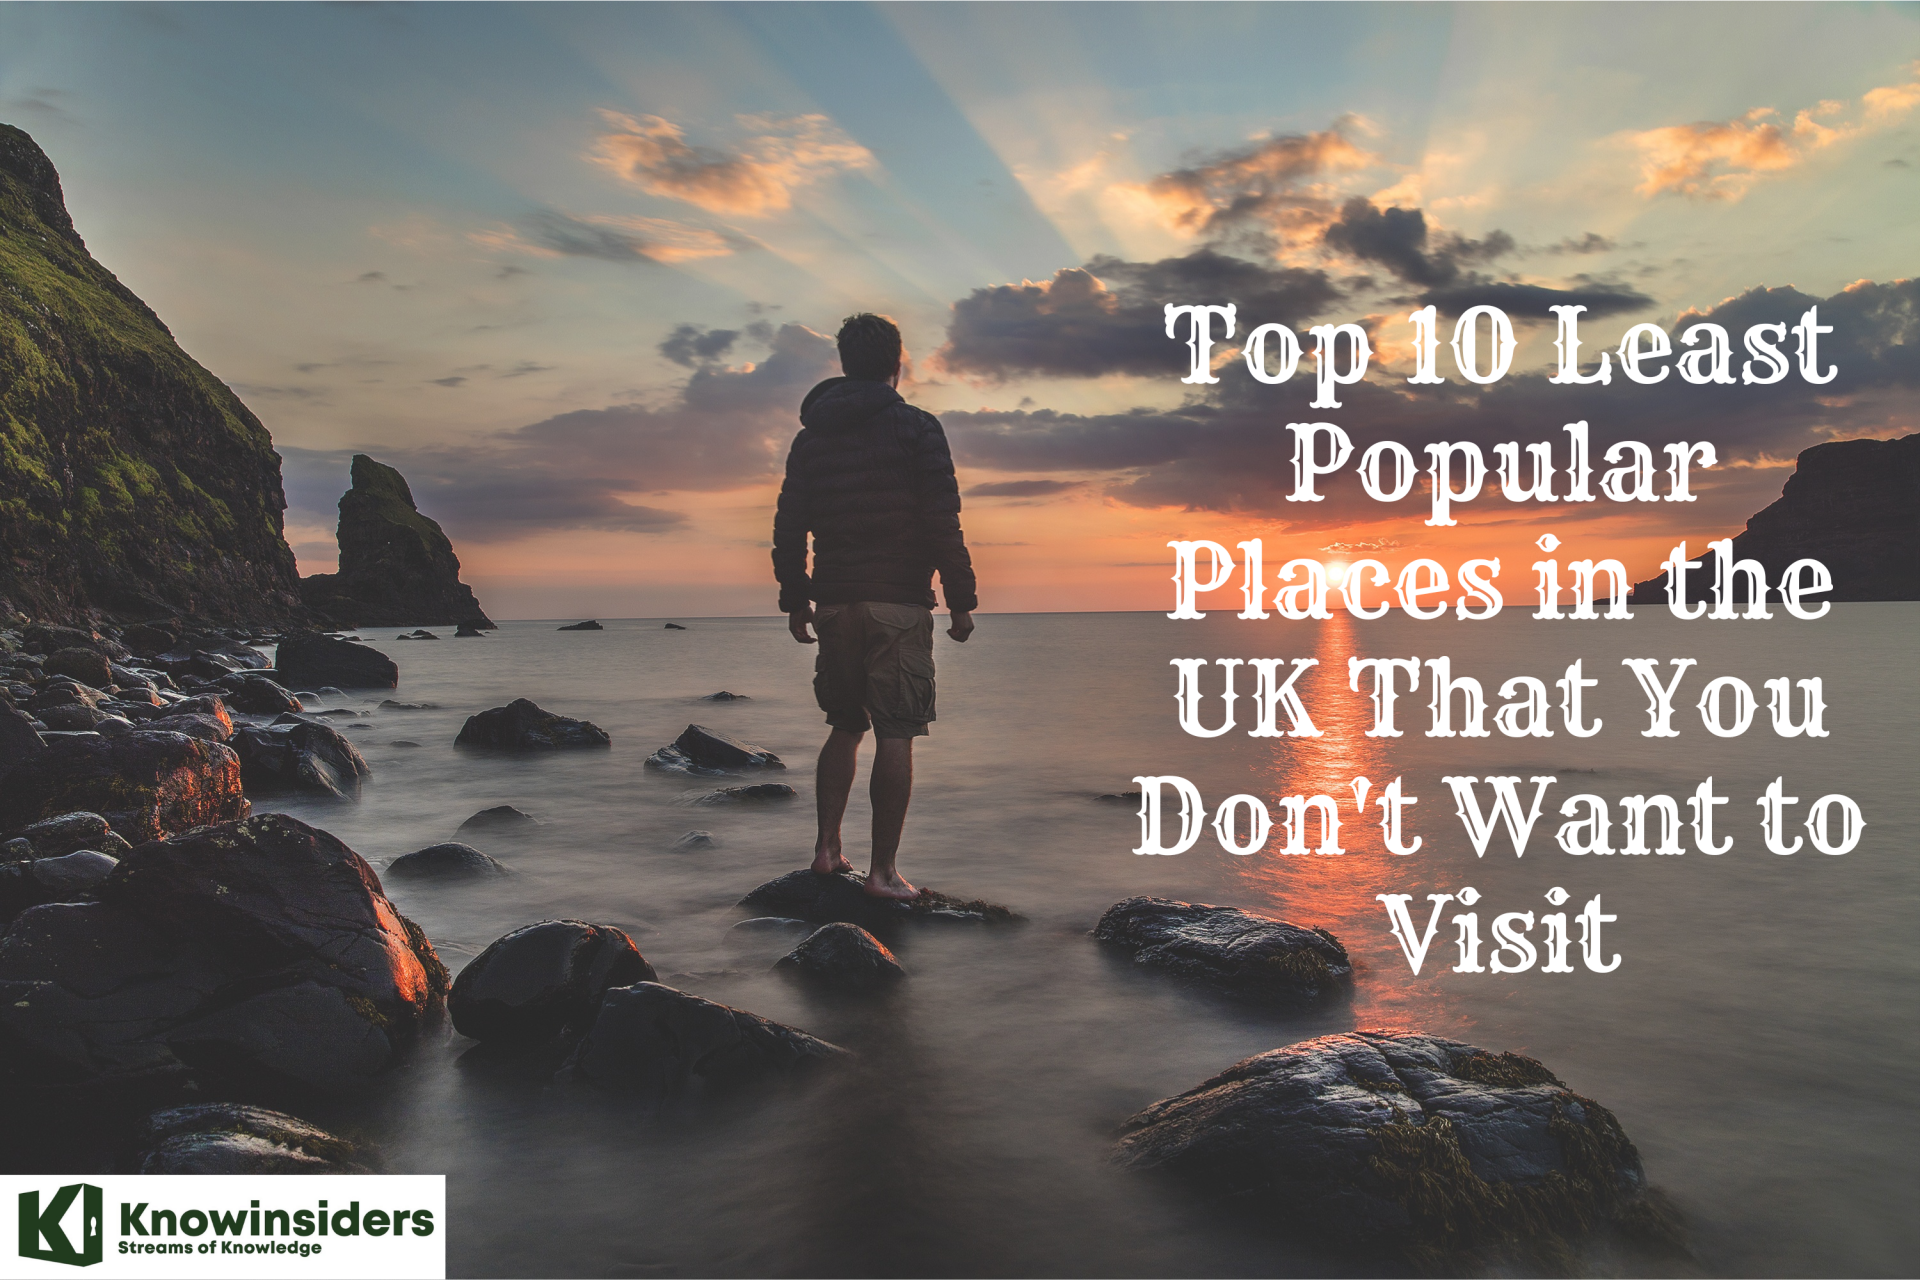 Top 10 Least Popular Places in the UK That You Don't Want to Visit